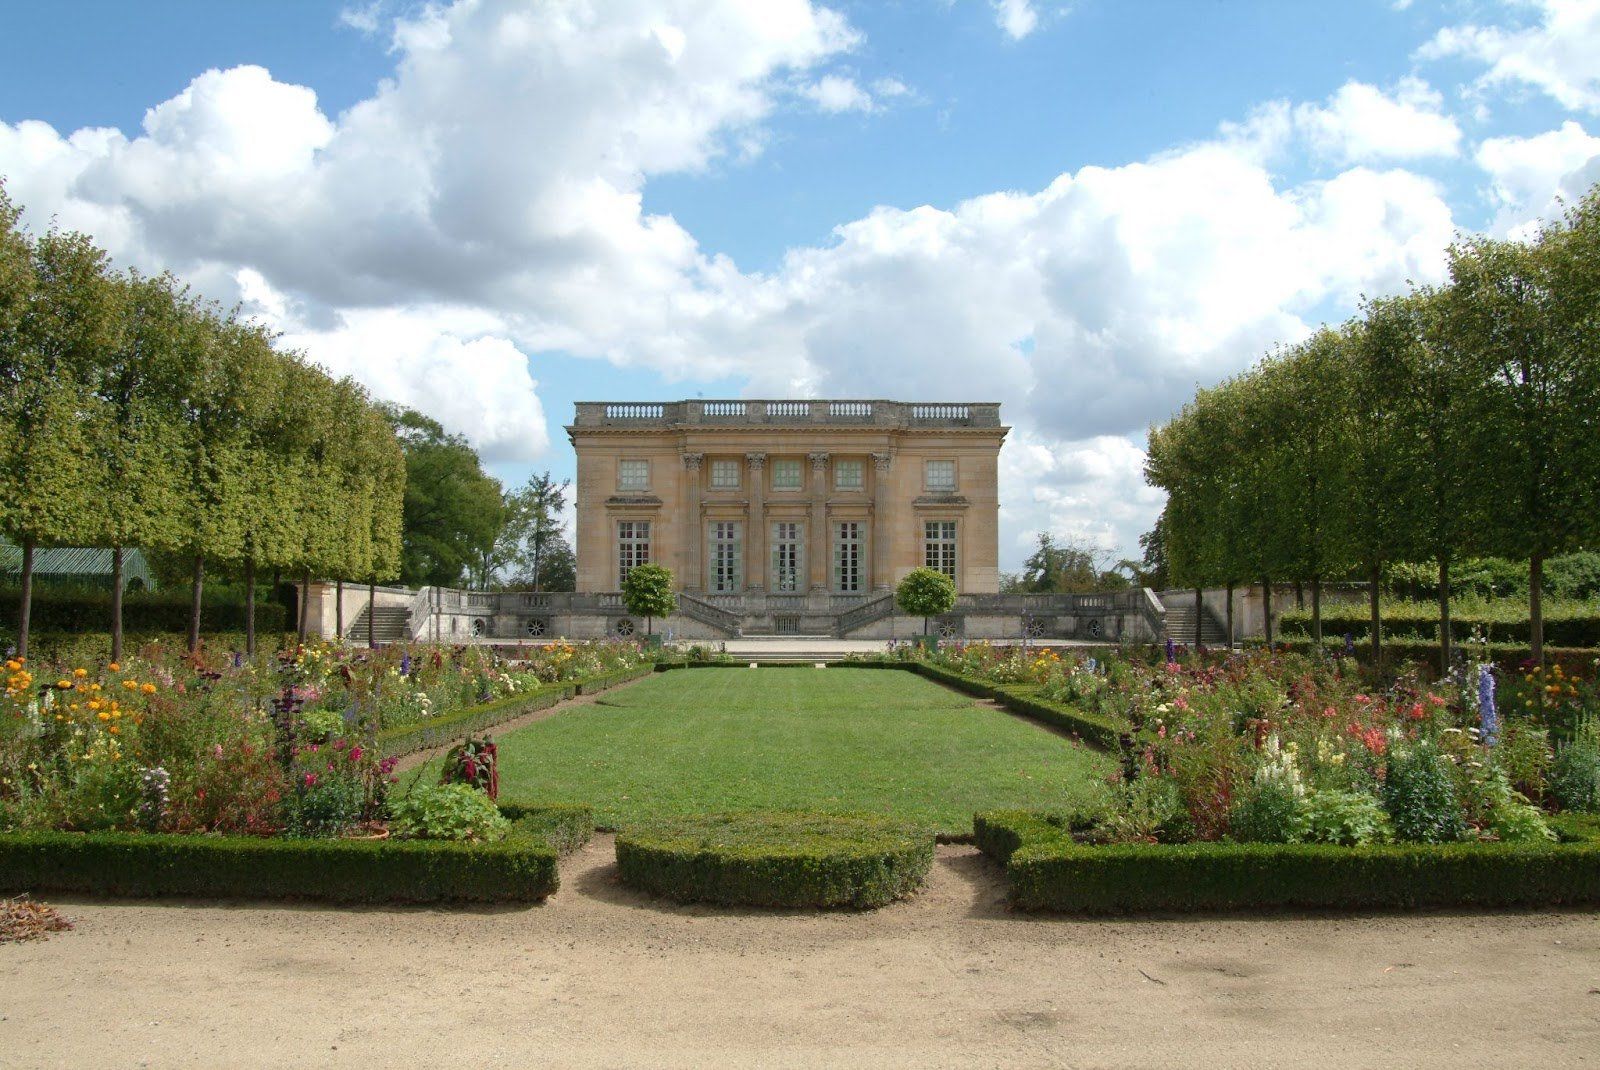 Versailles’ Petit Trianon, the private estate cherished by the ruler